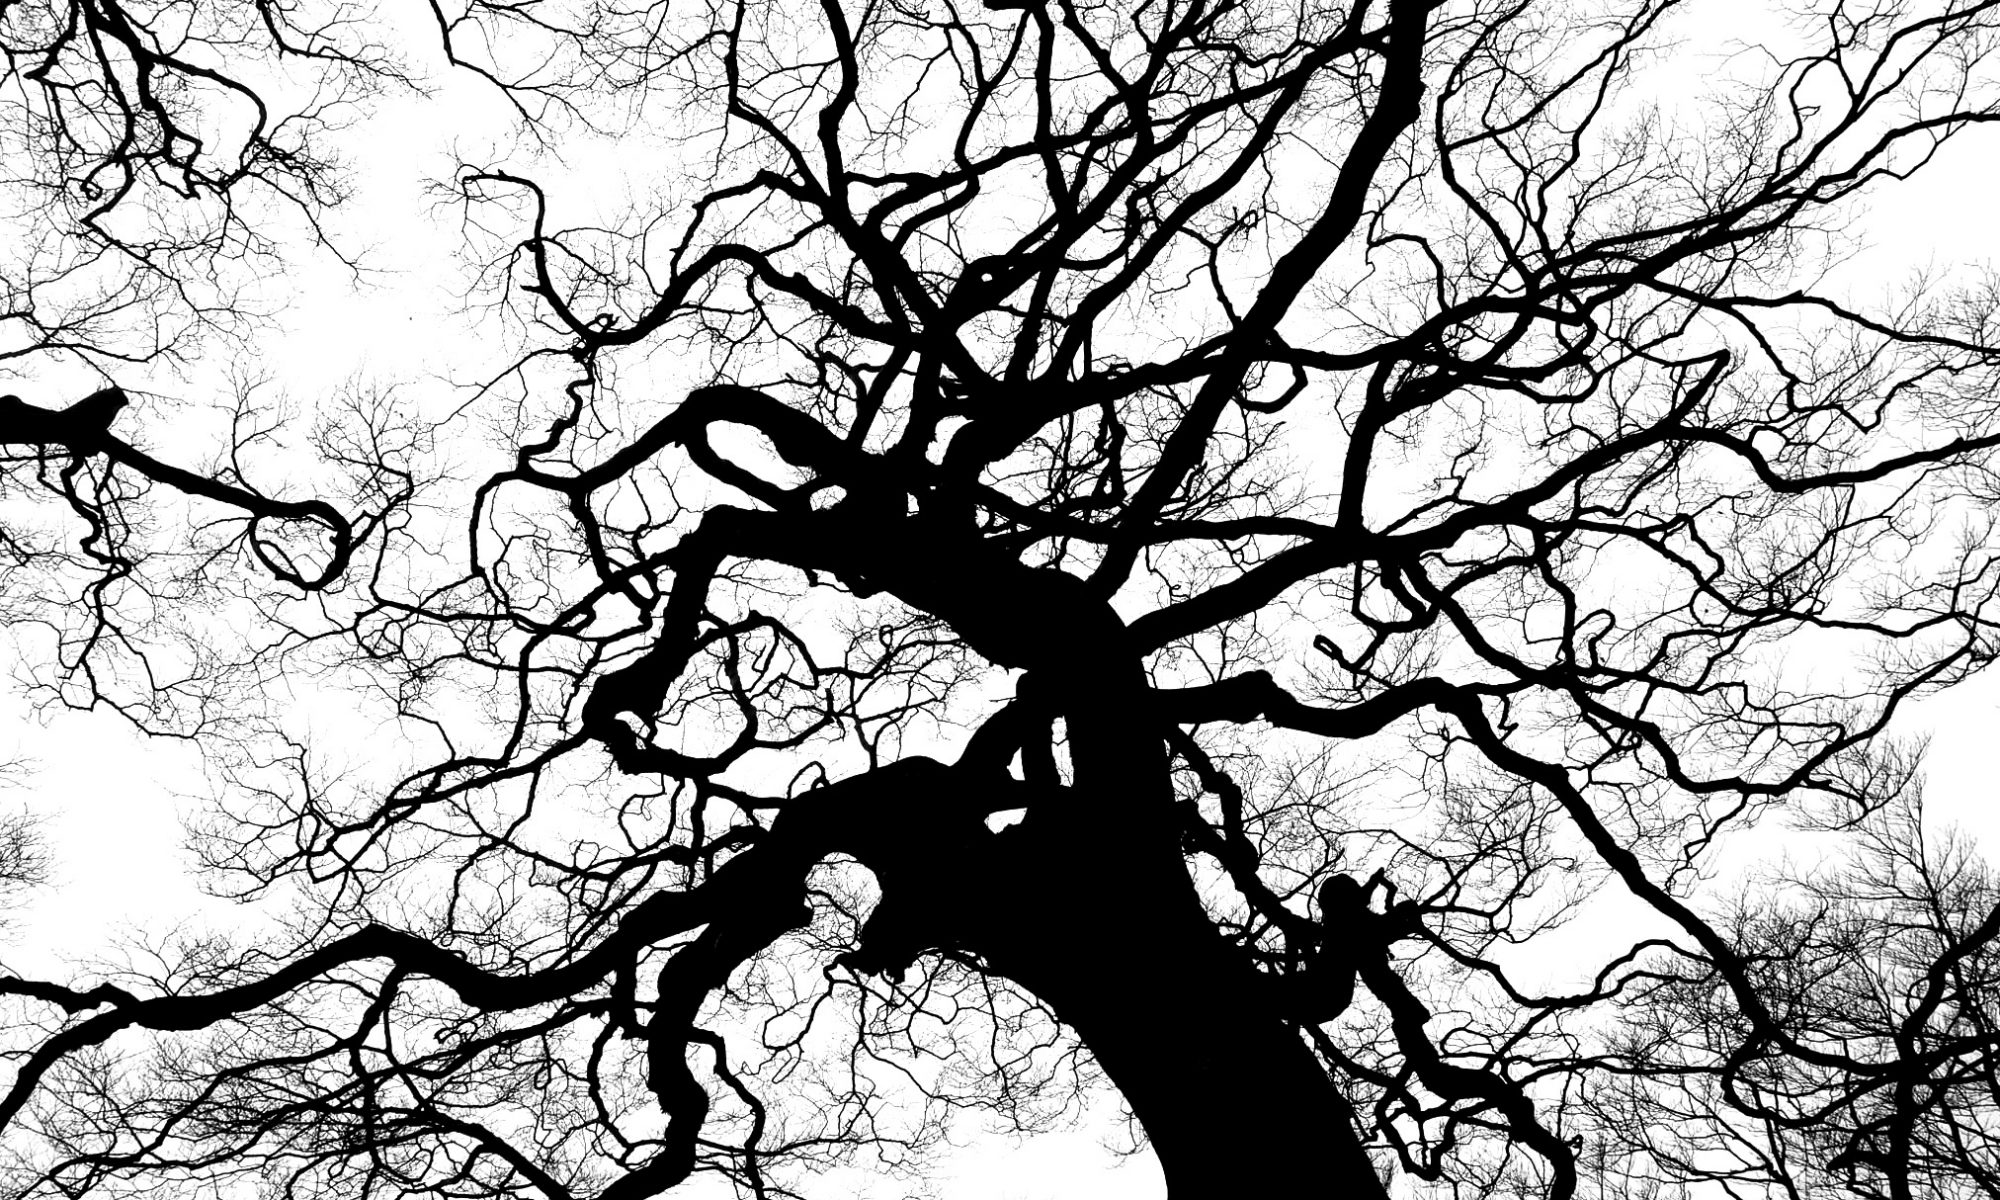 The branches of a tree against the sky.